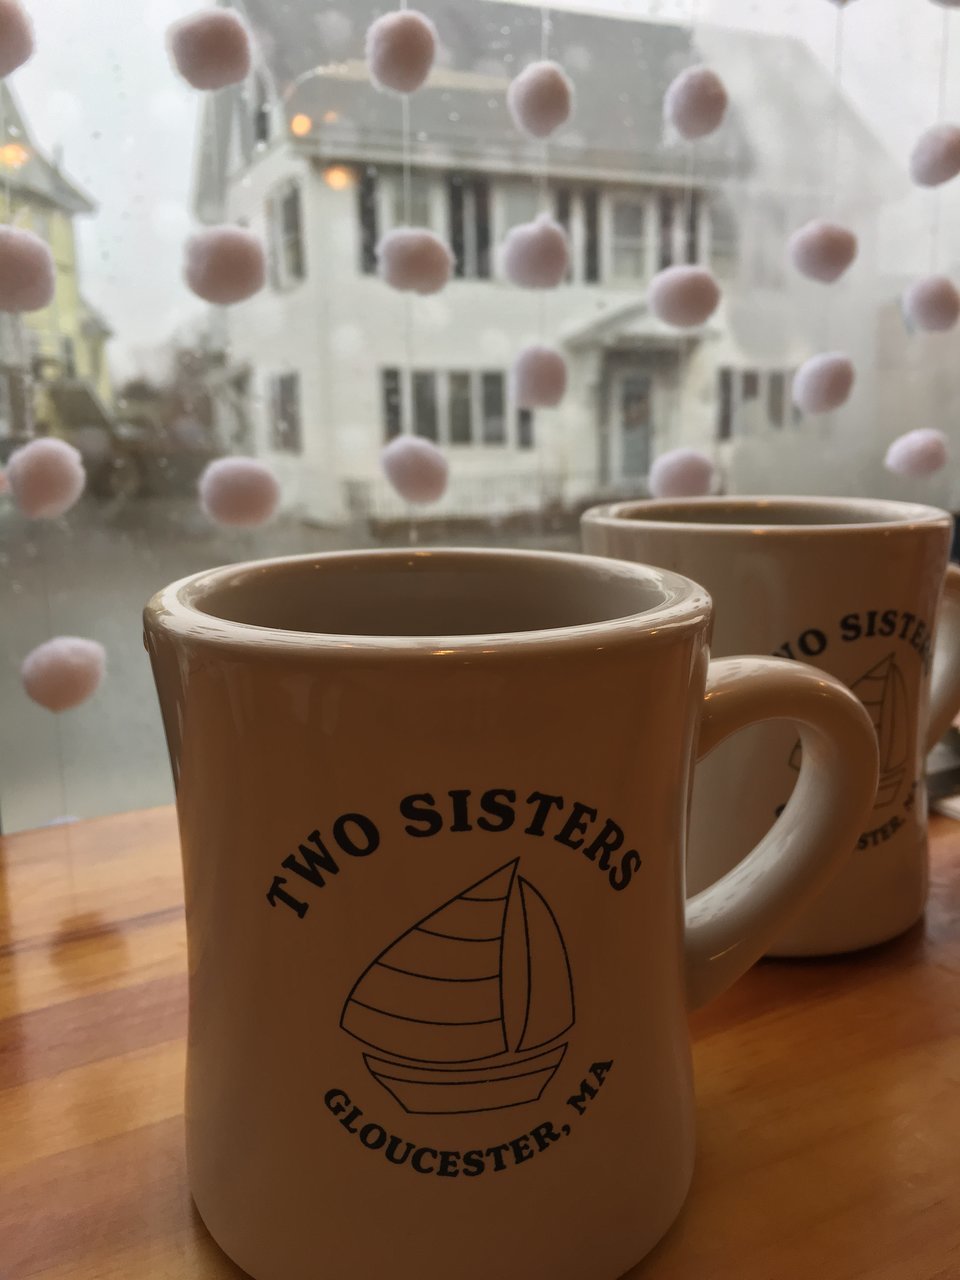 Two Sisters Coffee Shop